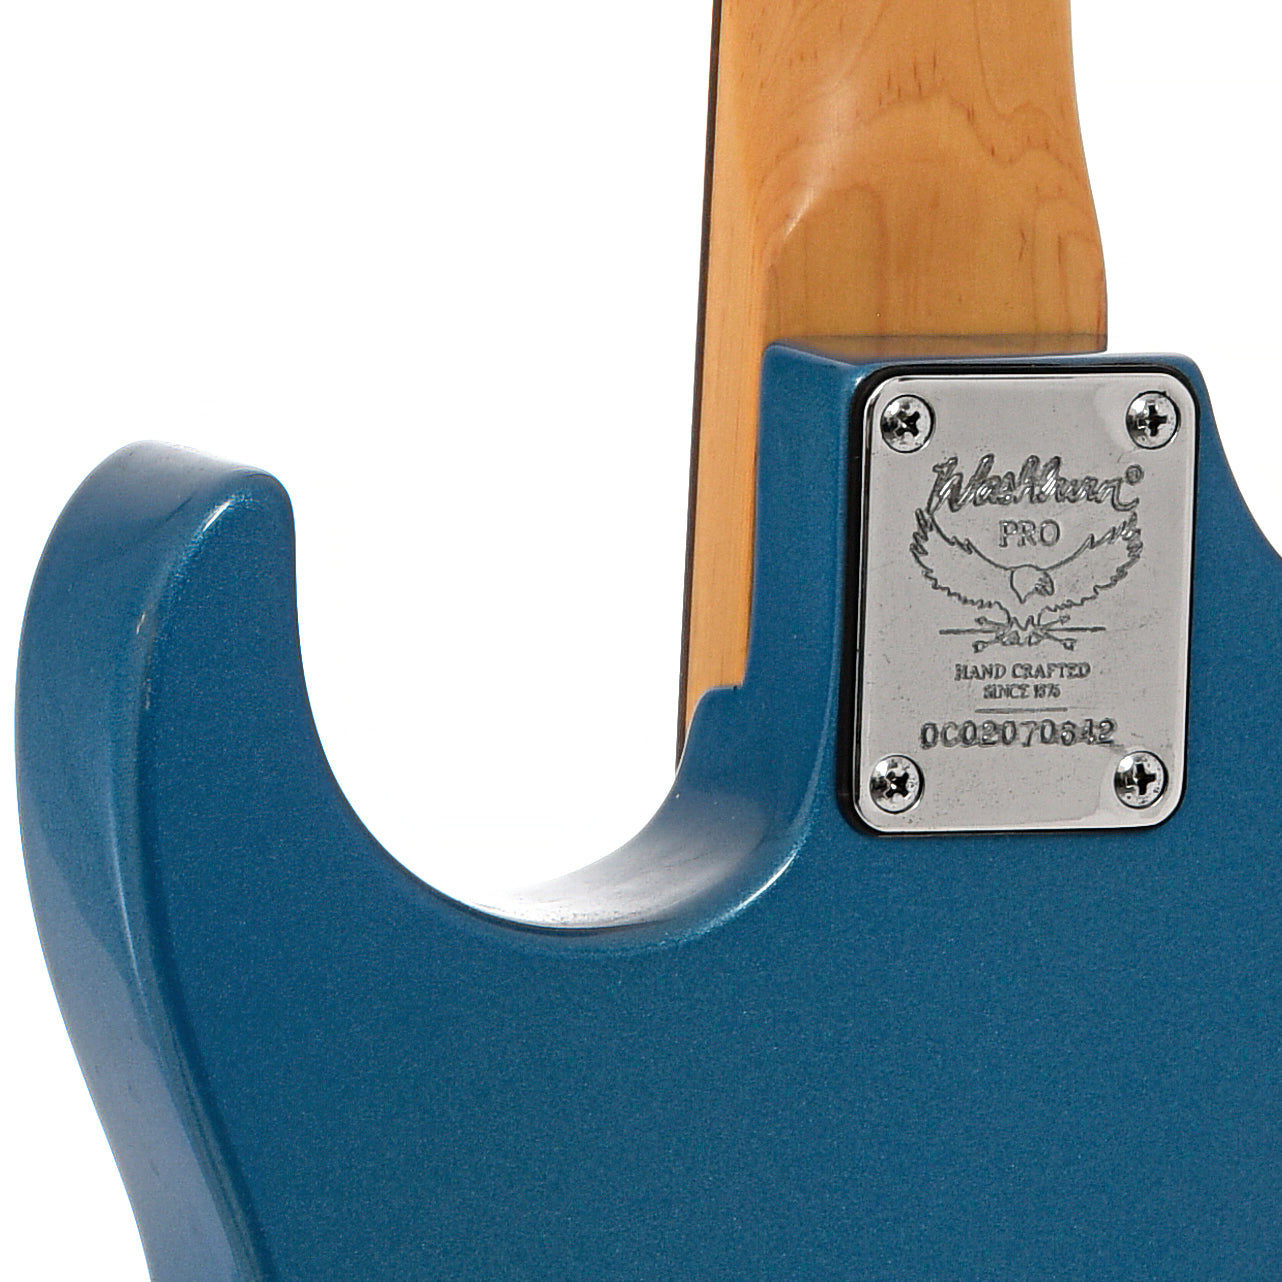 Neck joint of Washburn X-22